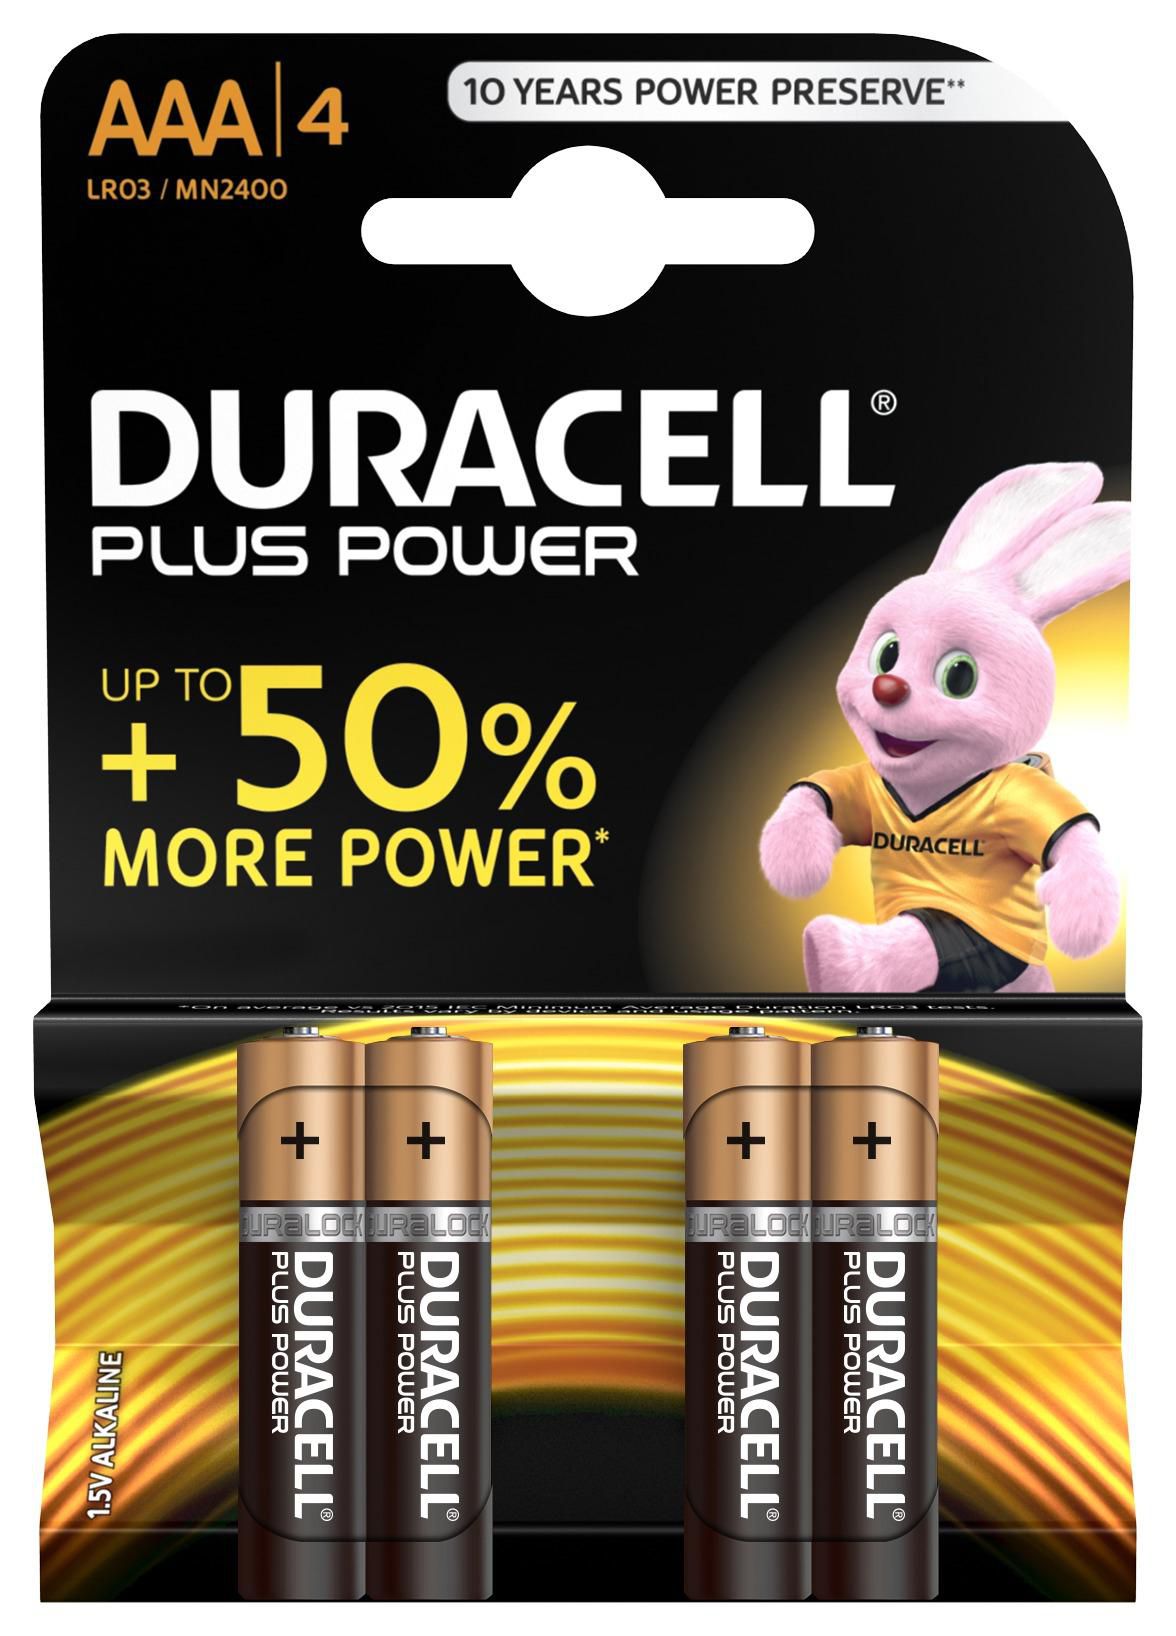 Duracell 5000394018457 W128272540 Plus Power Single-Use Battery 